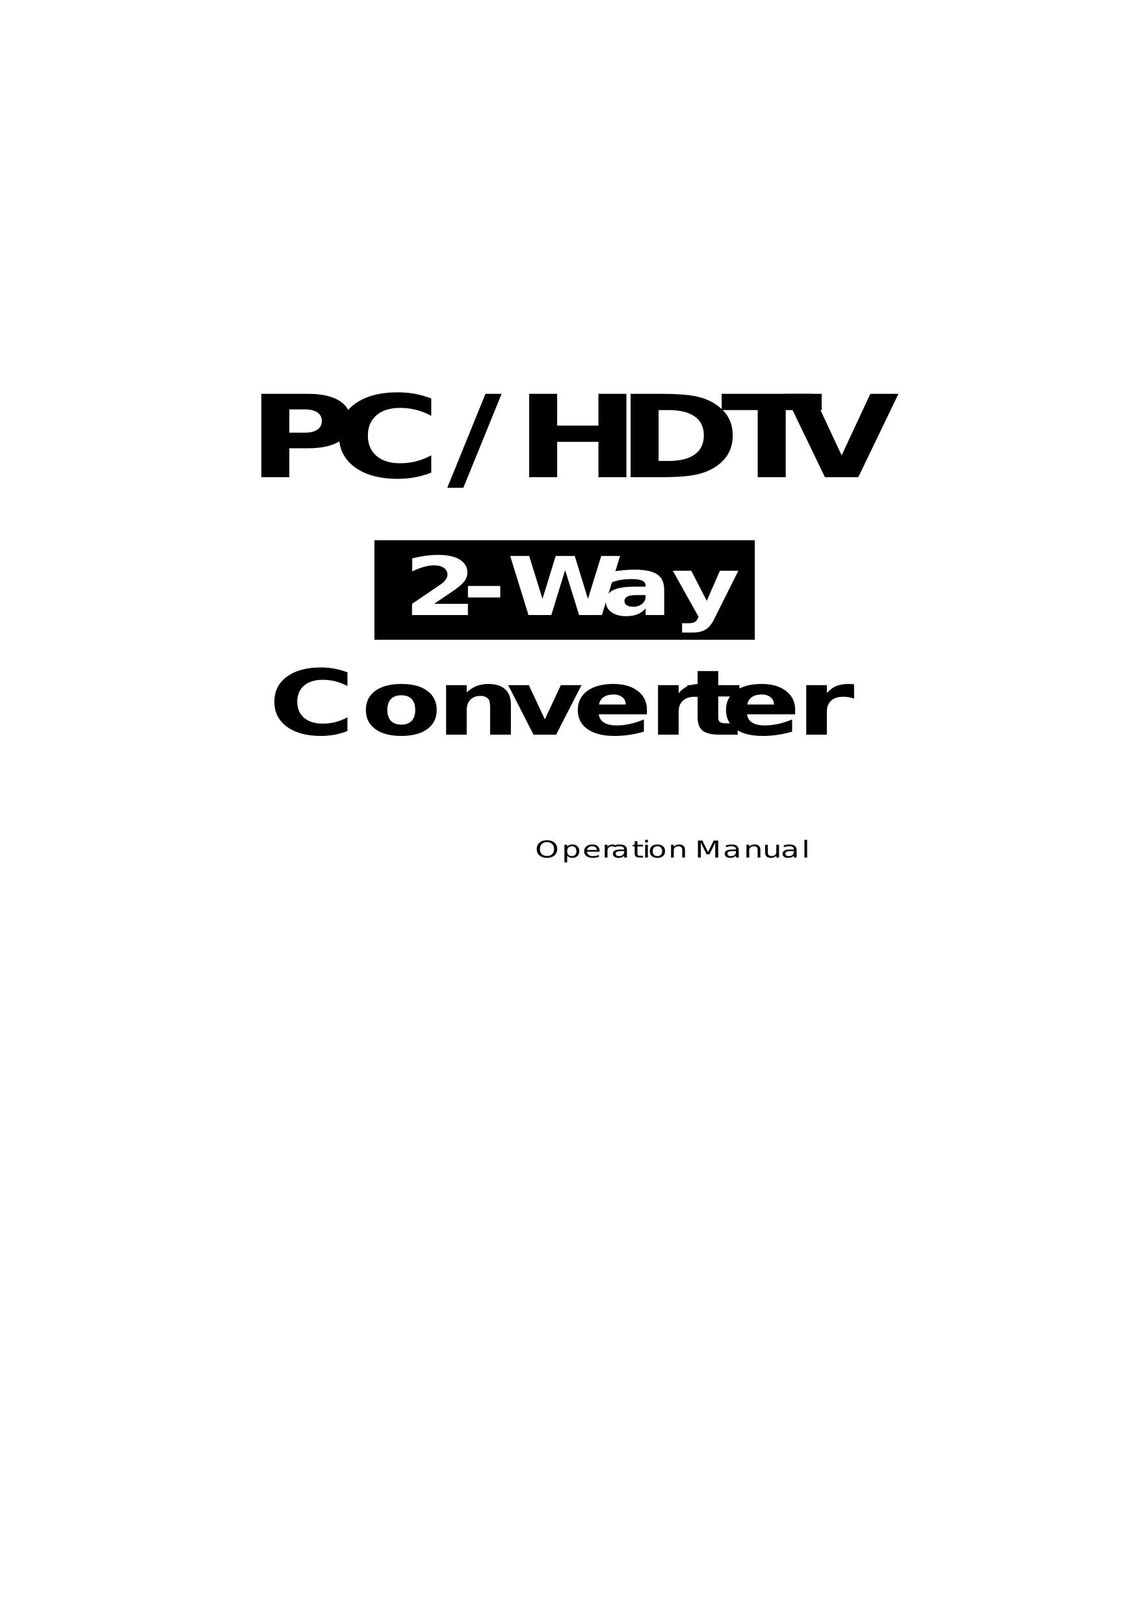 Video Products PC-HDTV-CNVTR Computer Hardware User Manual